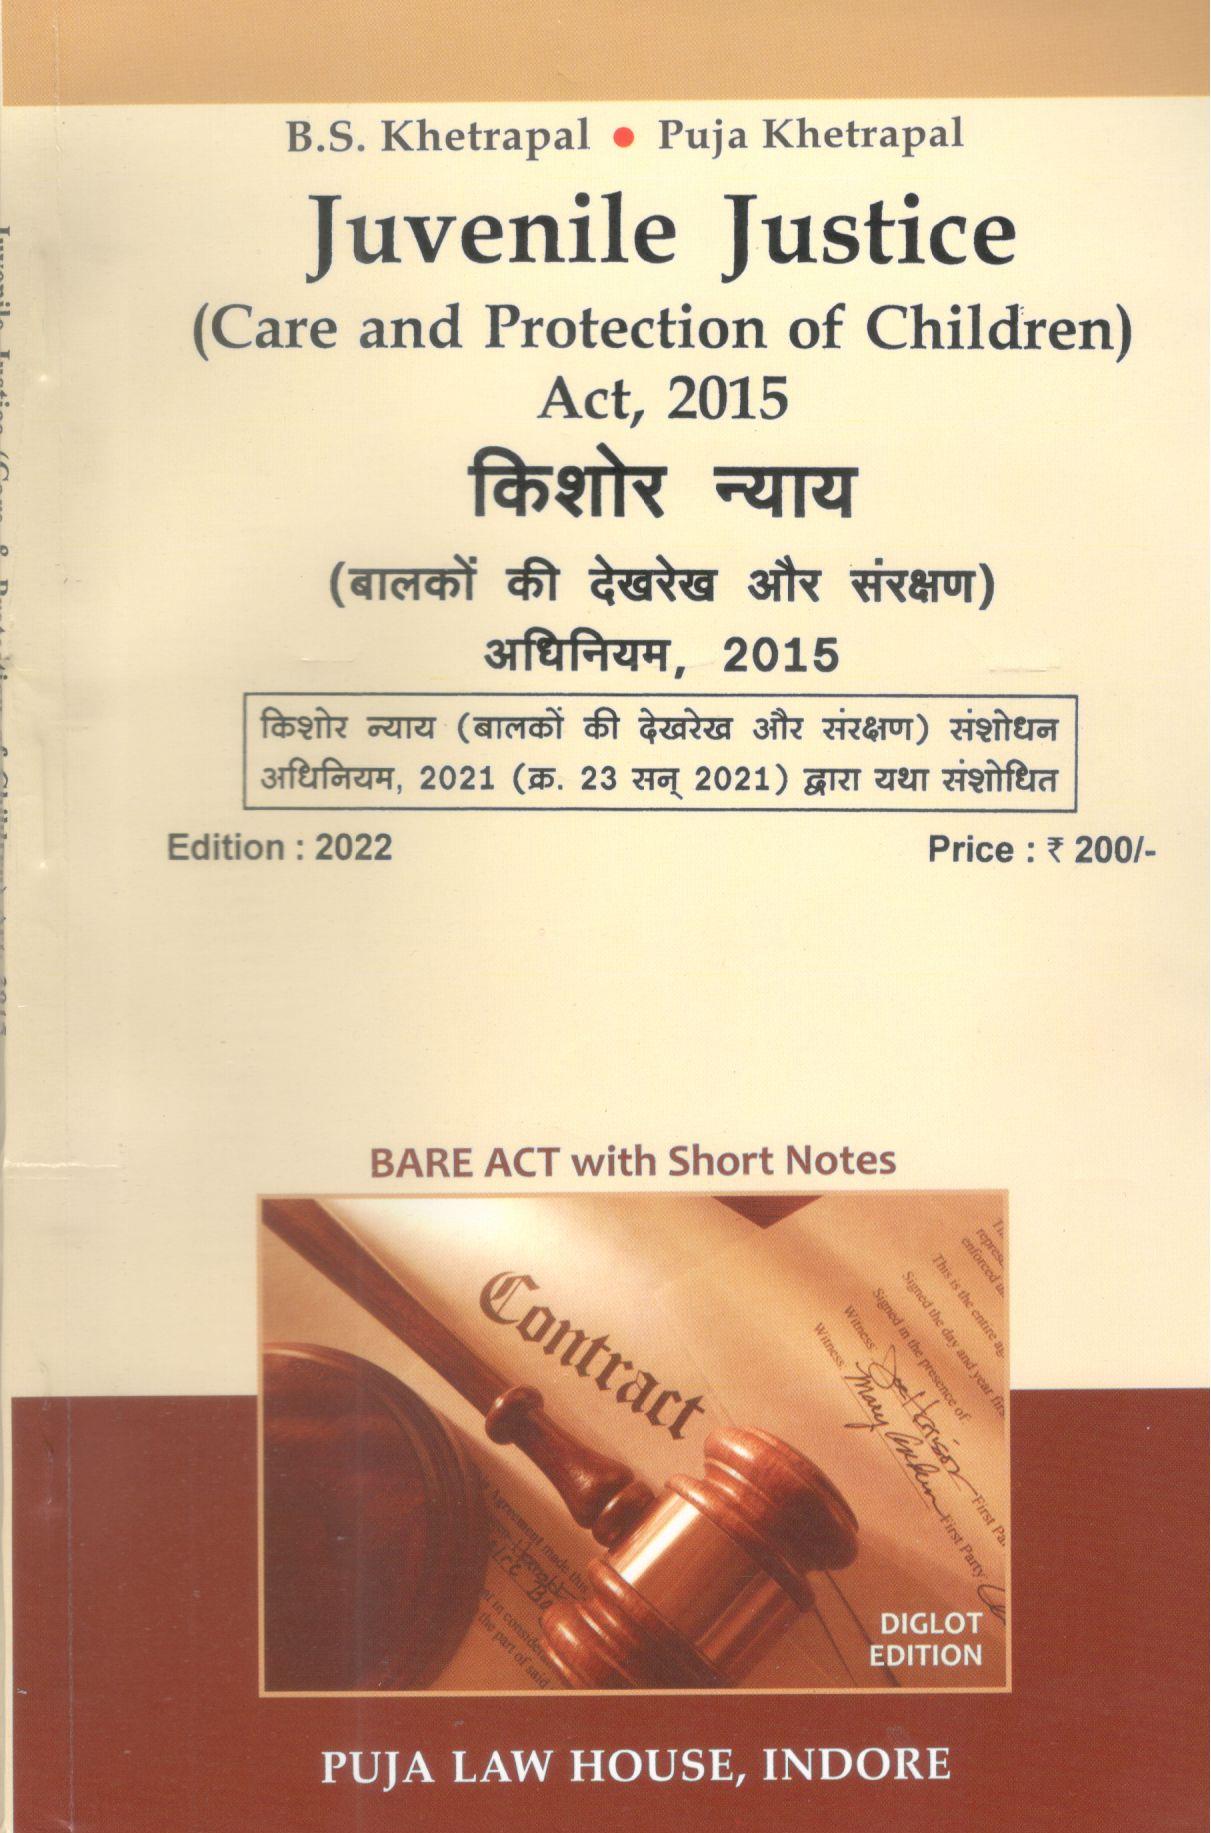  Buy किशोर न्याय (बालको की देख-रेख और संरक्षण) अधिनियम, 2015 / Juvenile Justice (Care and Protection of Children) Act, 2015